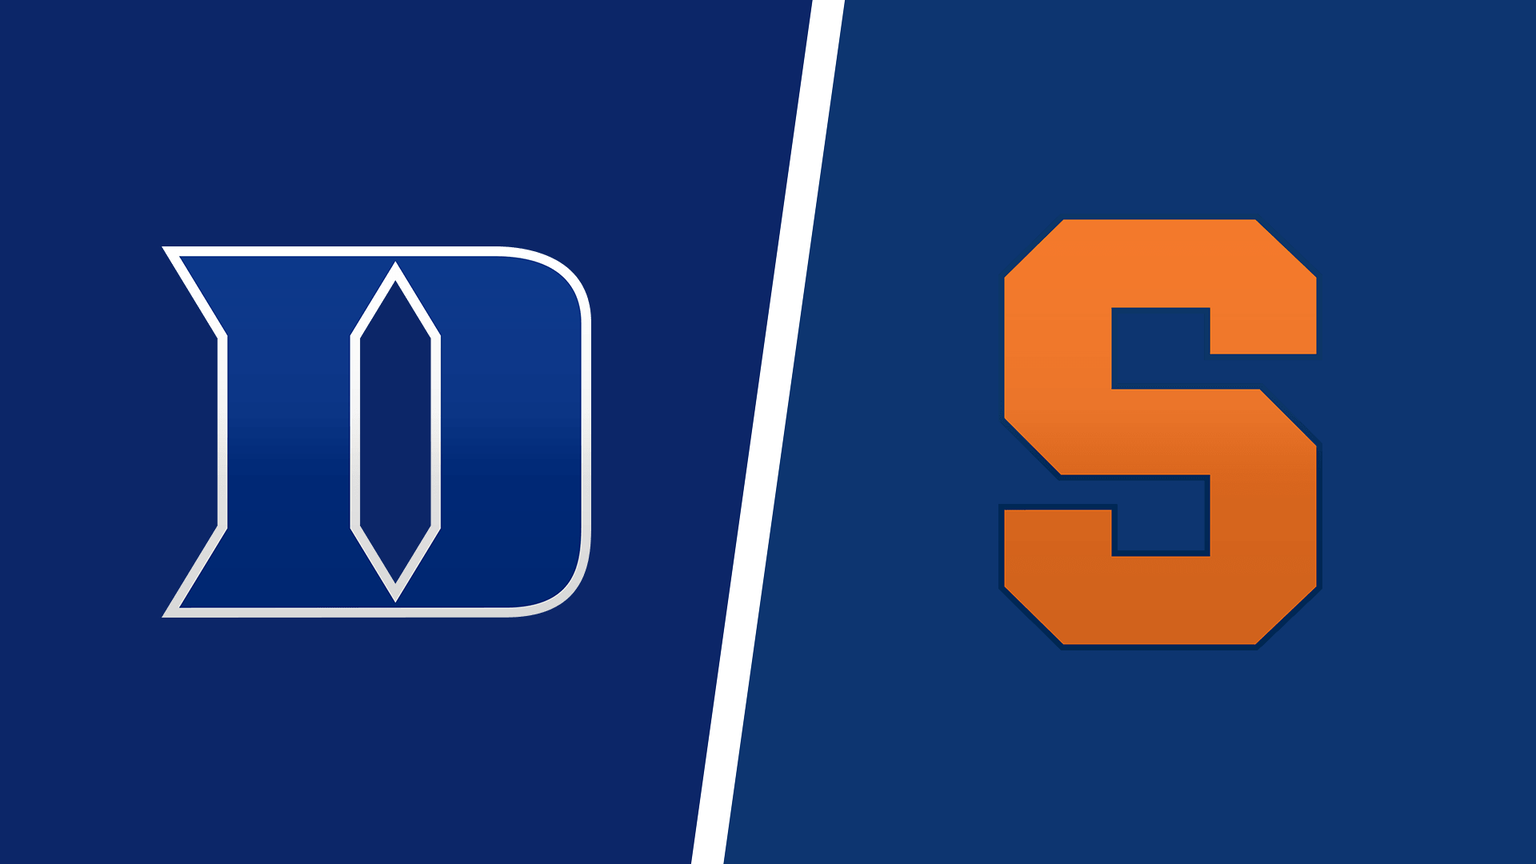 How to Watch Syracuse vs. Duke Game Live Online on January 22, 2022